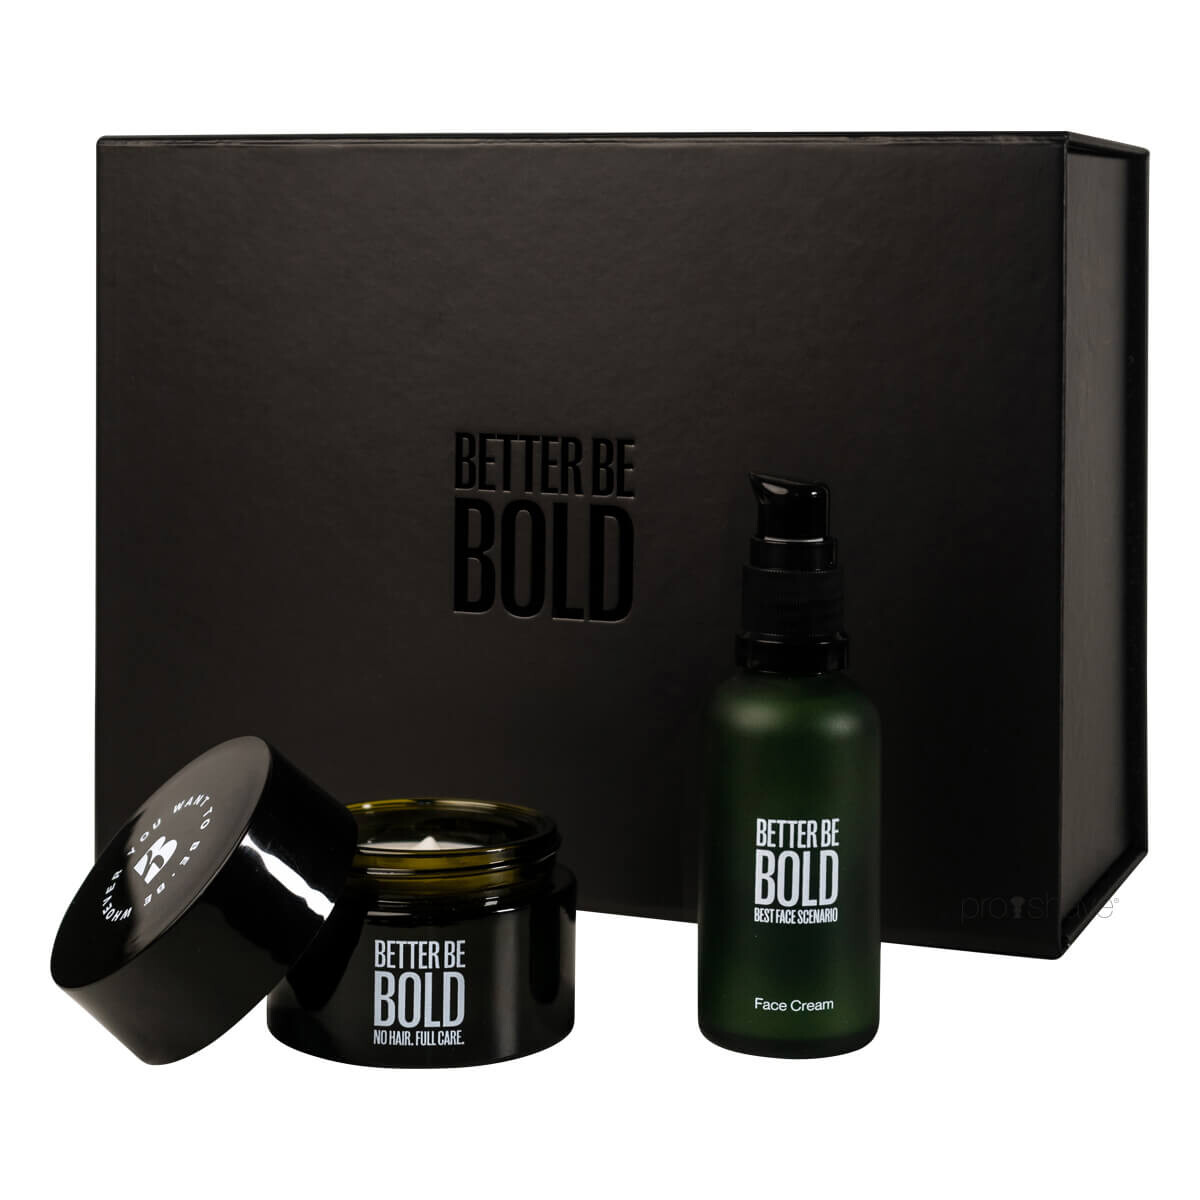 Better Be Bold, Gift Box For Bald People (Bald Cream + Best Face)